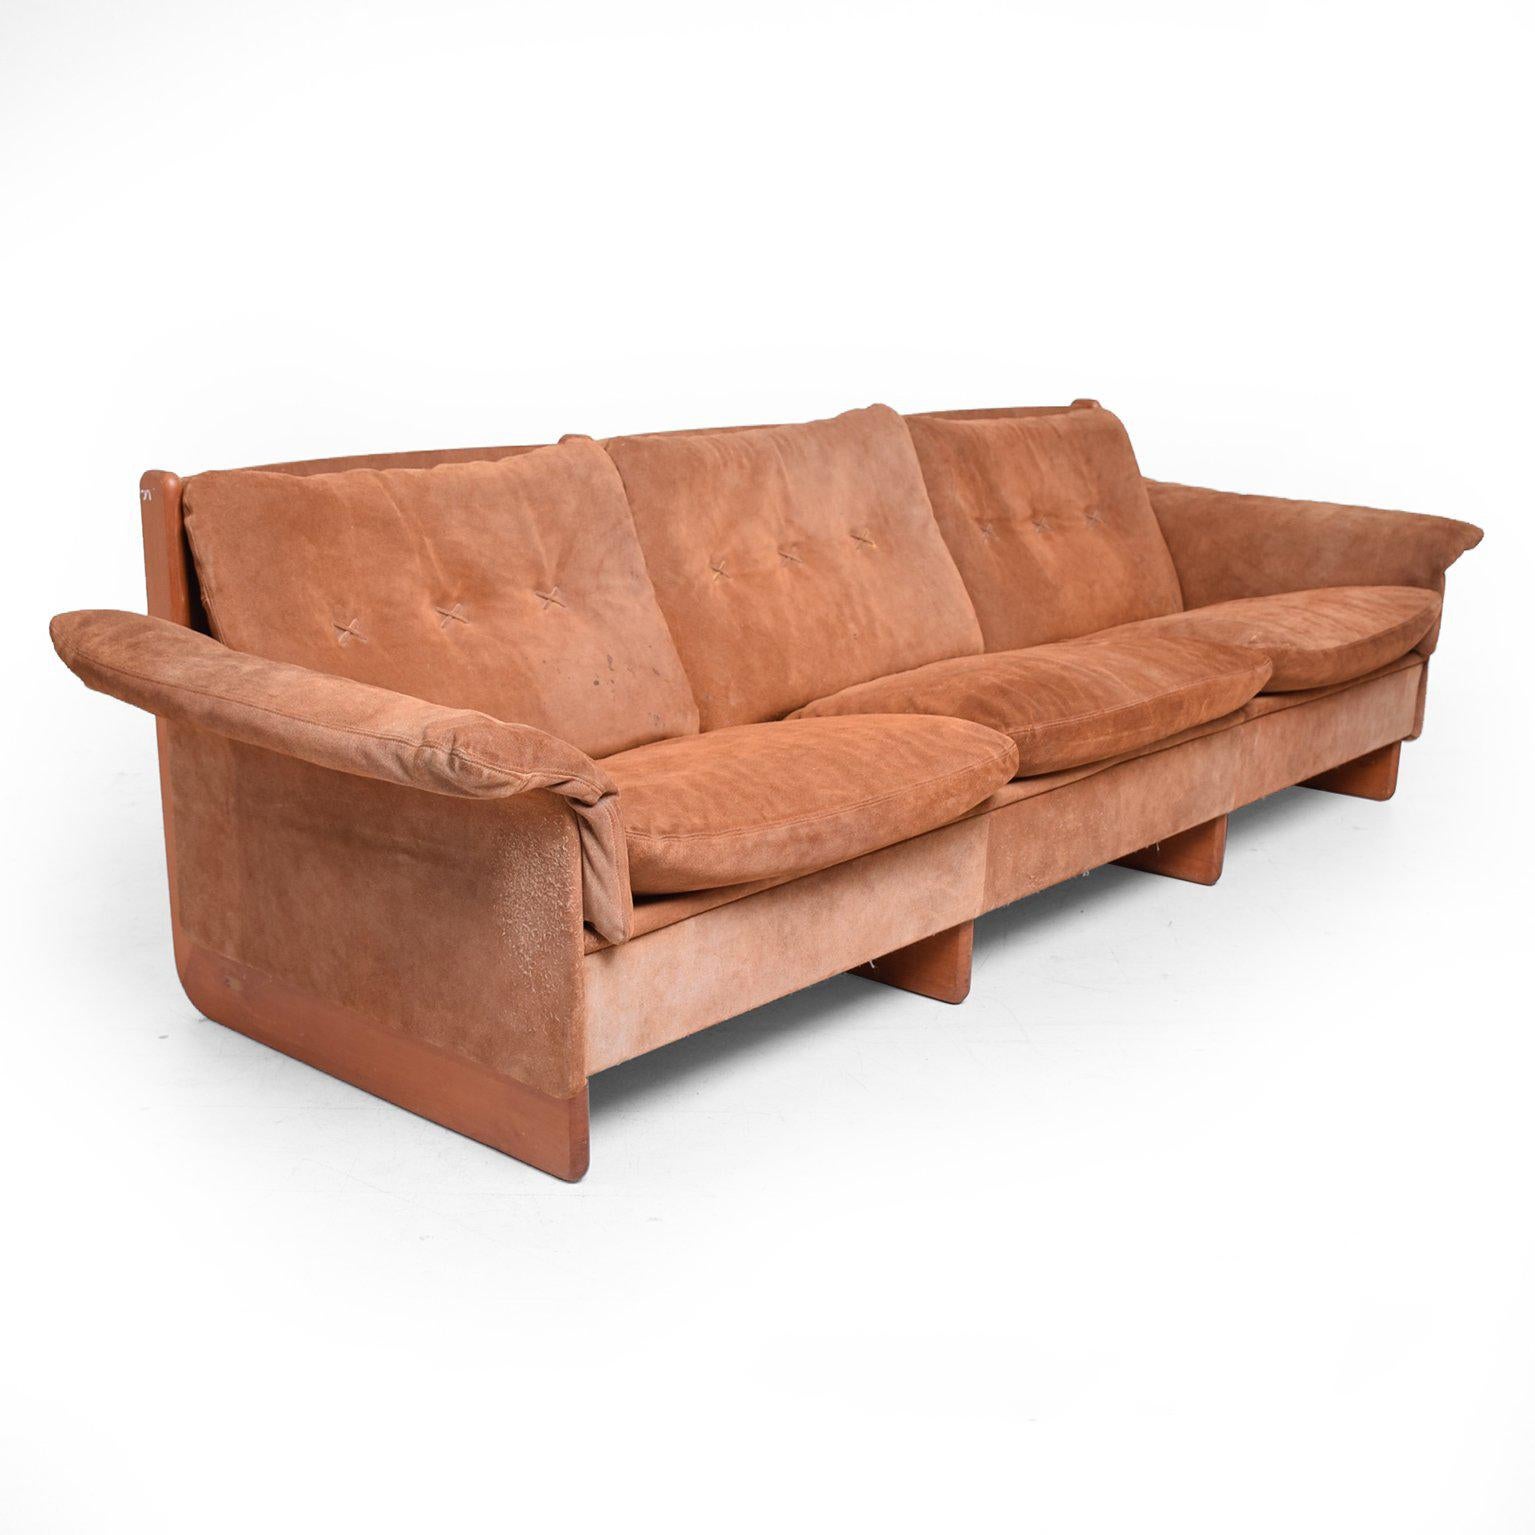 For your consideration a Danish modern sofa constructed with suede in medium brown tones with angled design of teakwood. 

Stamped made in Denmark. 